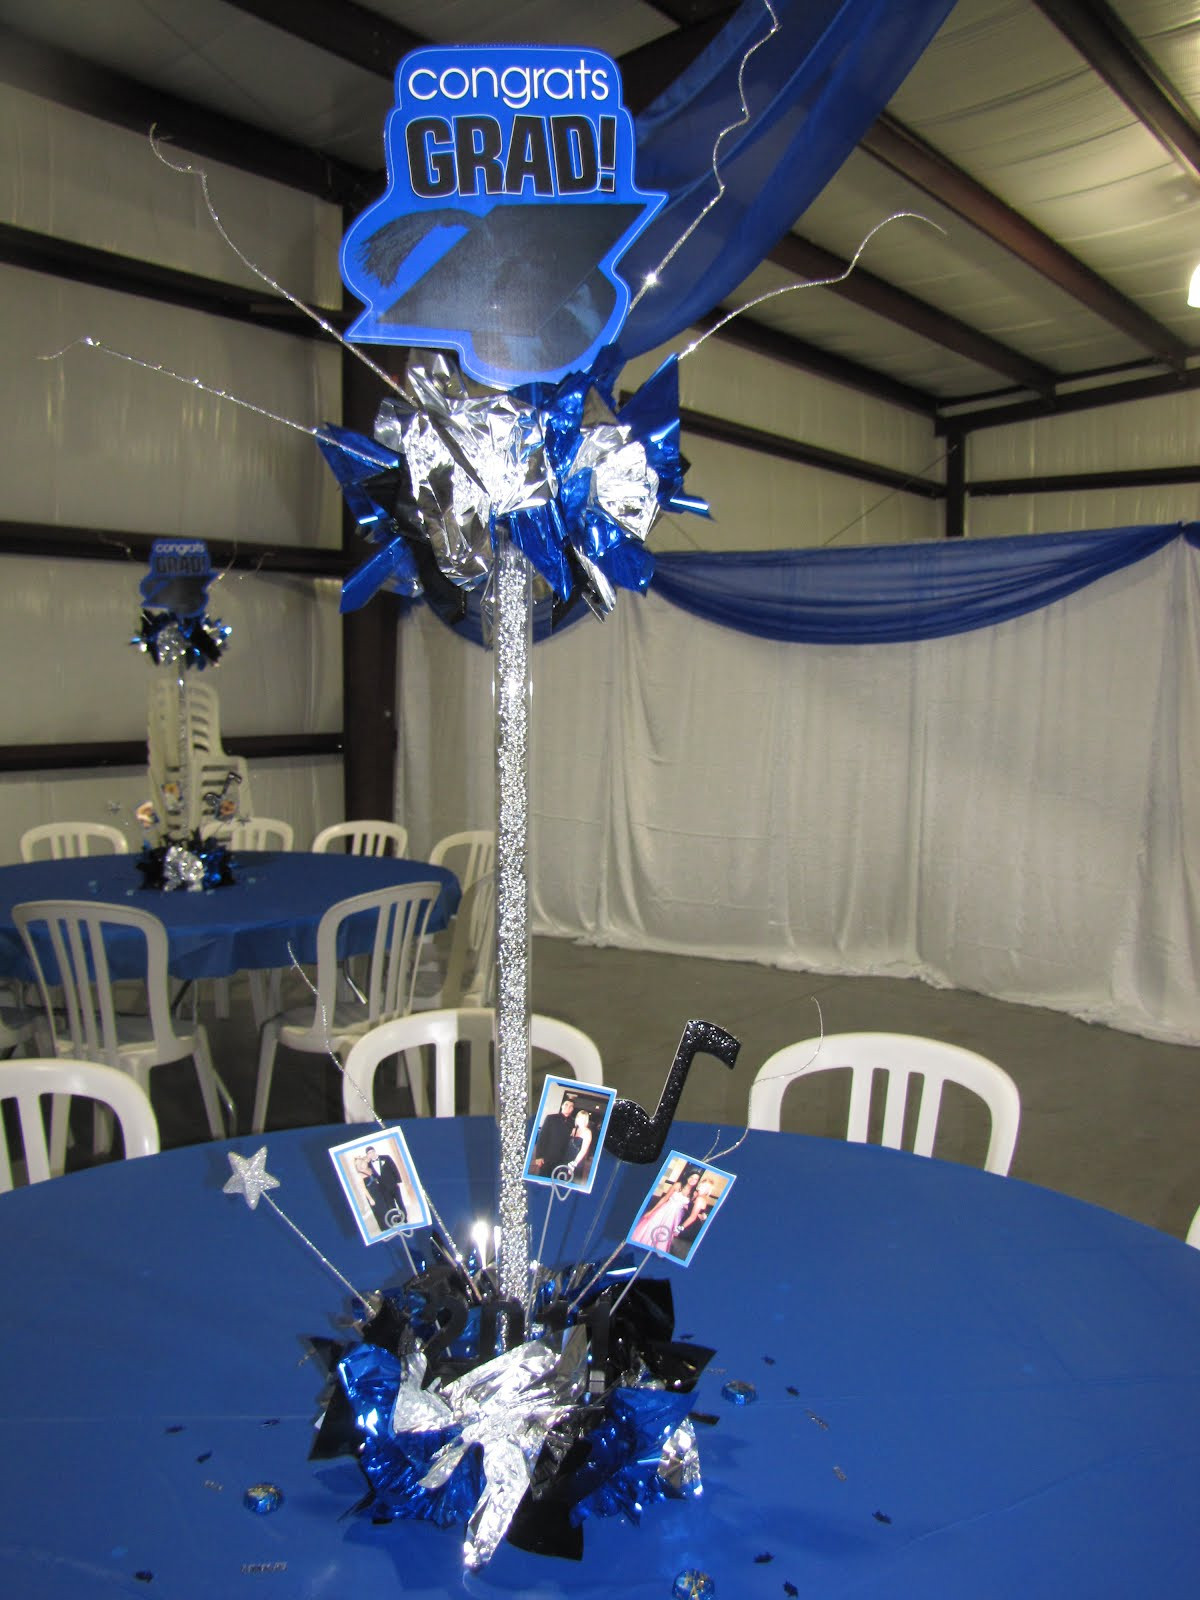 Ideas For Table Decorations For Graduation Party
 Party People Event Decorating pany Graduation Decor